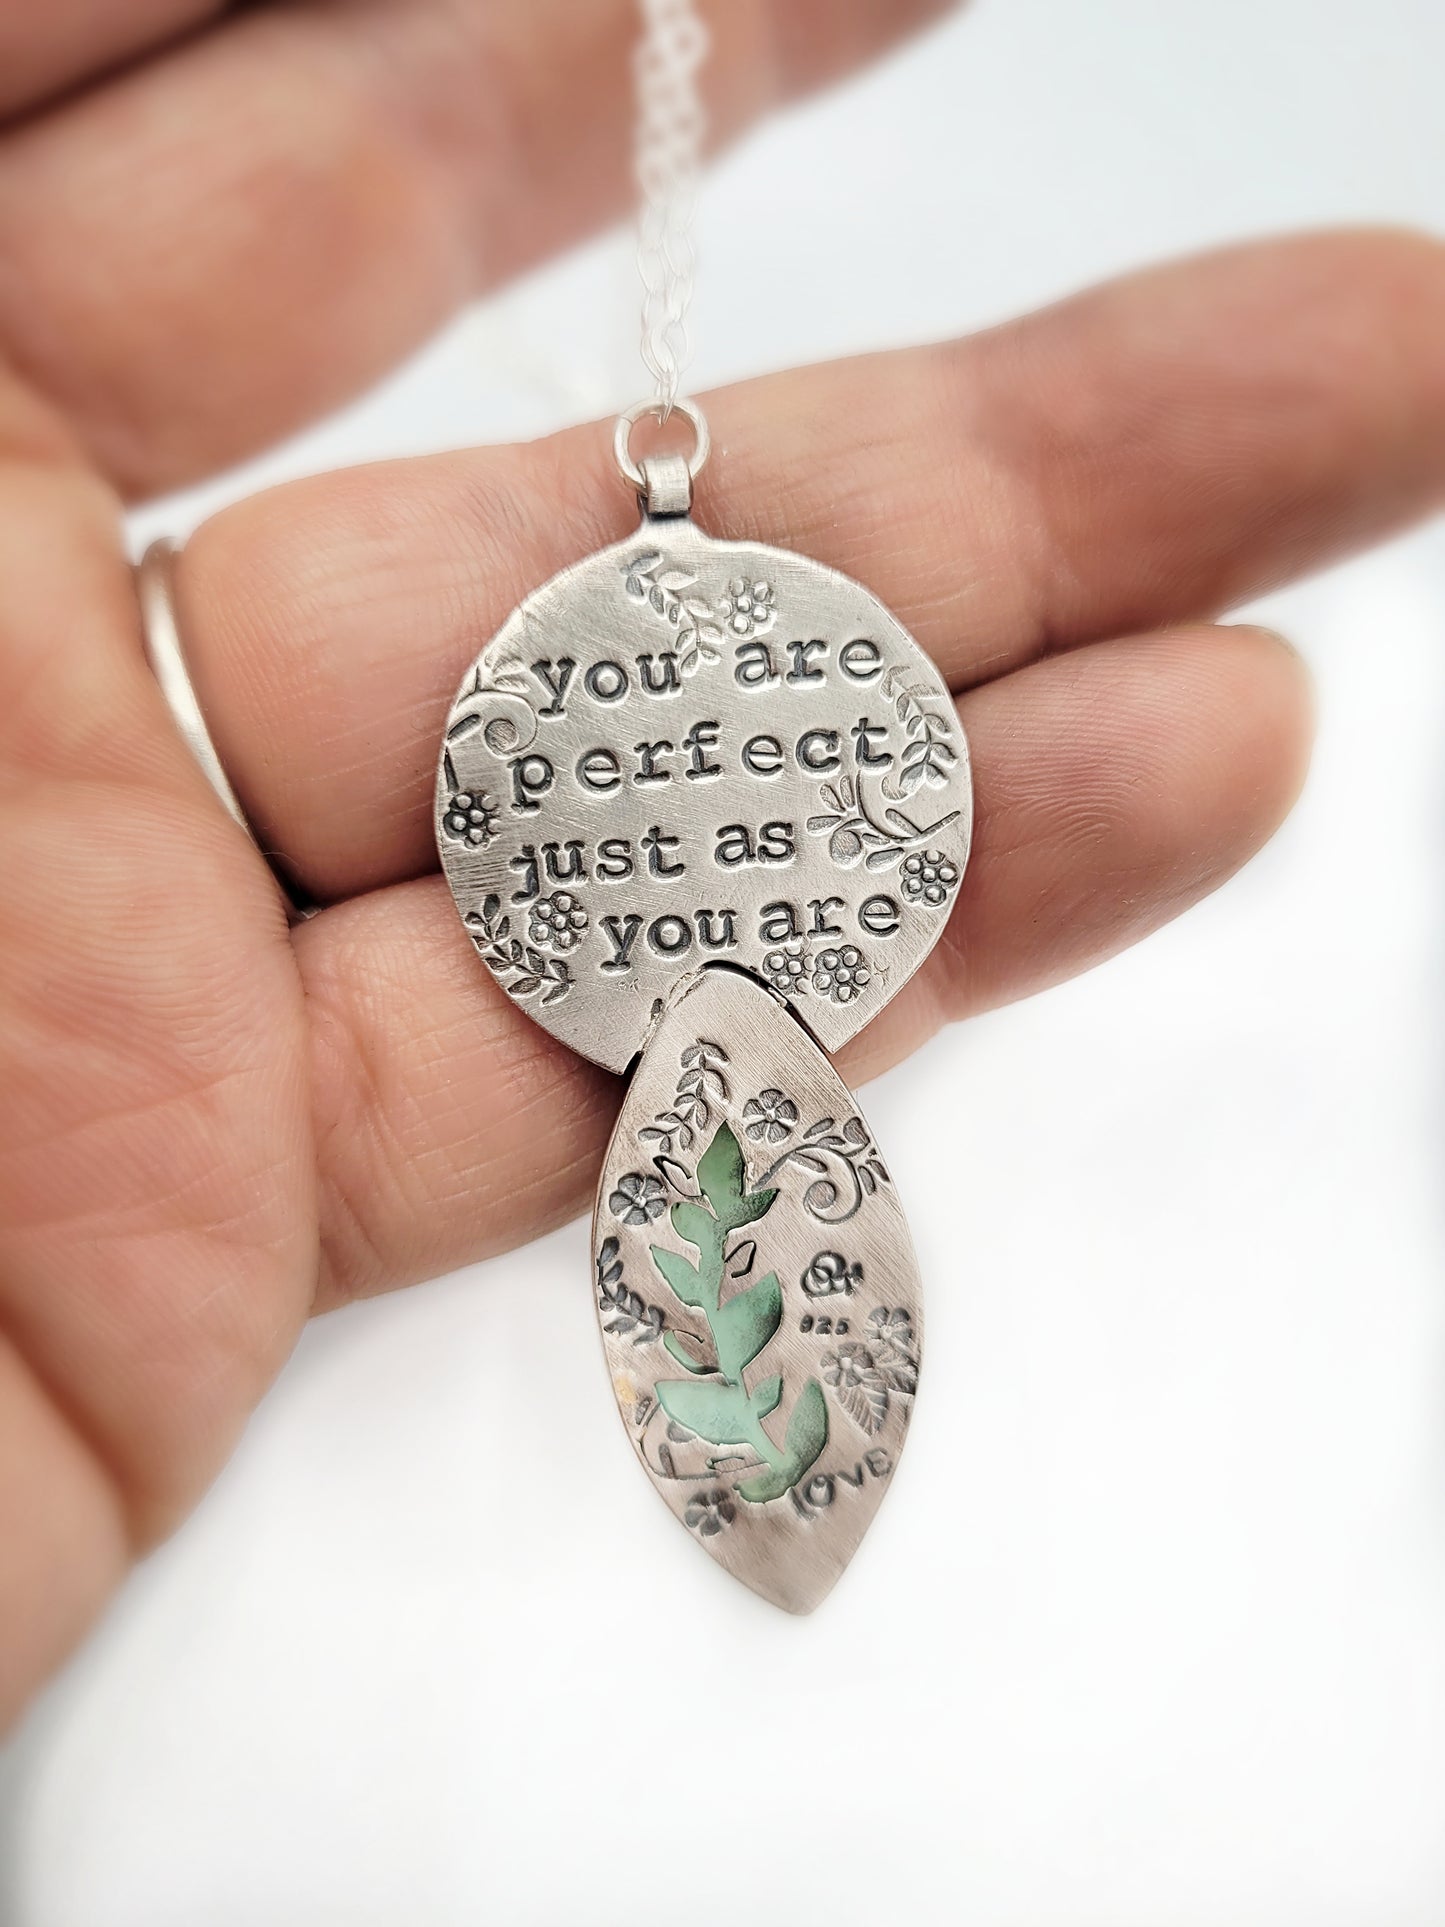 Botanical Blue "Perfect just as you are" quote necklace